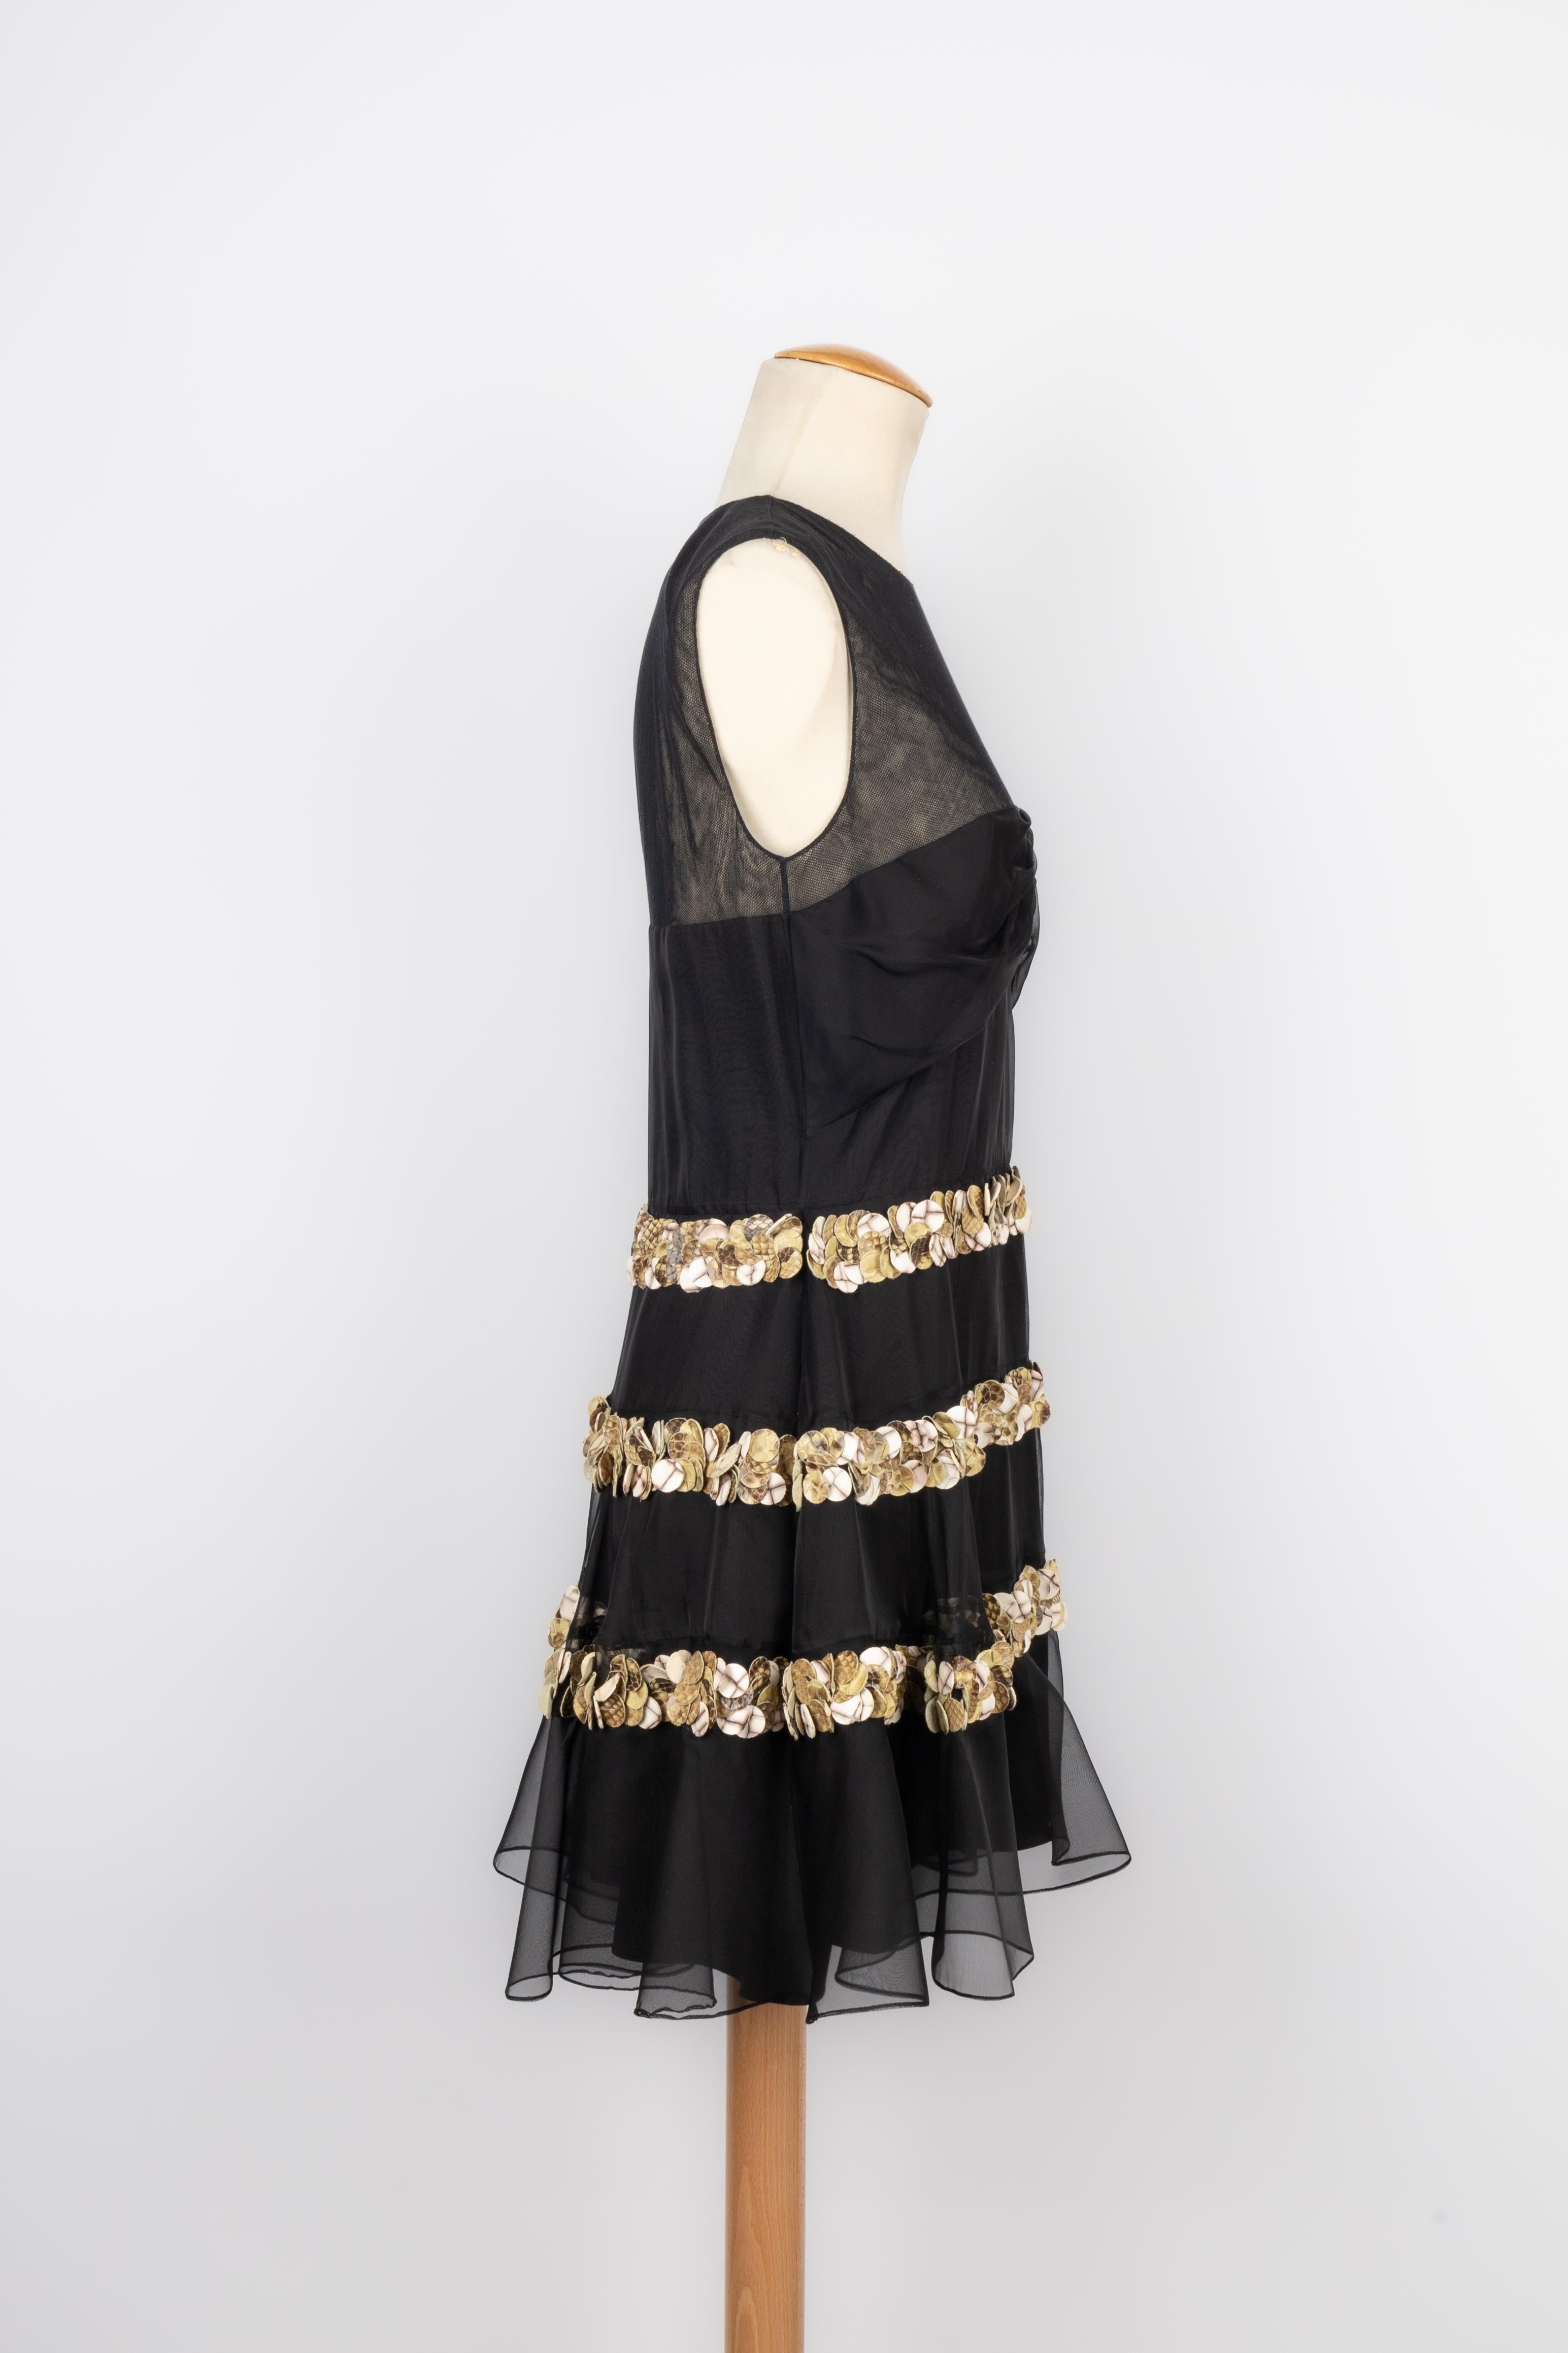 DIOR - (Made in France) Black silk and cotton dress embroidered with python and calf leather rings. 40FR size indicated. 2009 Spring-Summer Collection under the artistic direction of John Galliano

Condition:
Very good condition

Dimensions:
Chest: